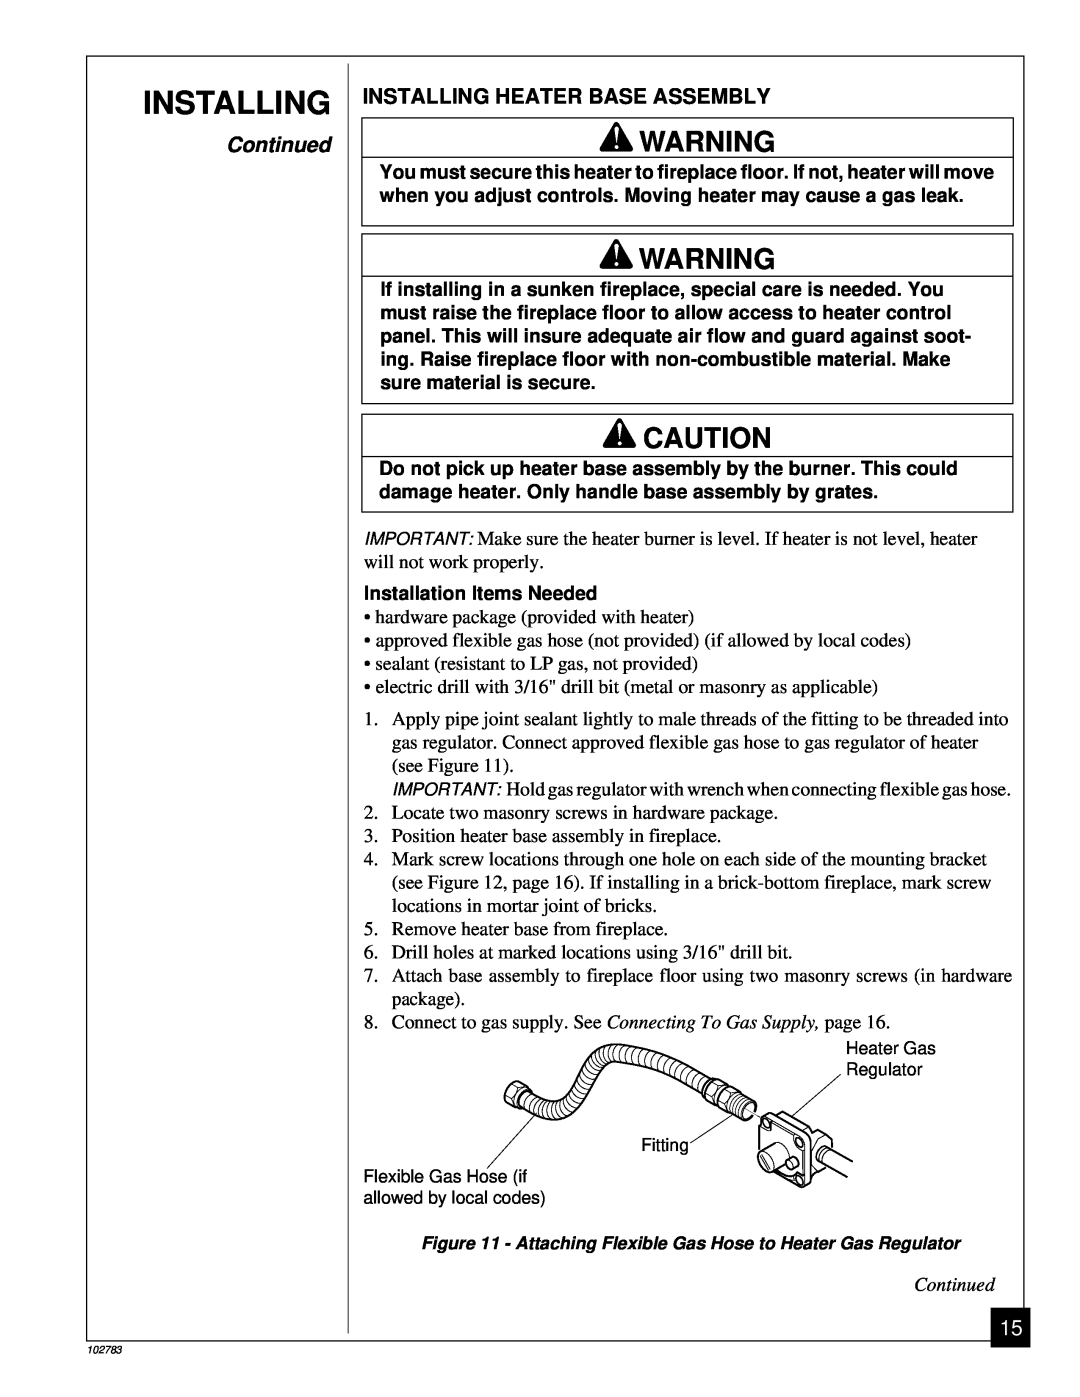 Desa 102783-01B installation manual Installing Heater Base Assembly, Continued 